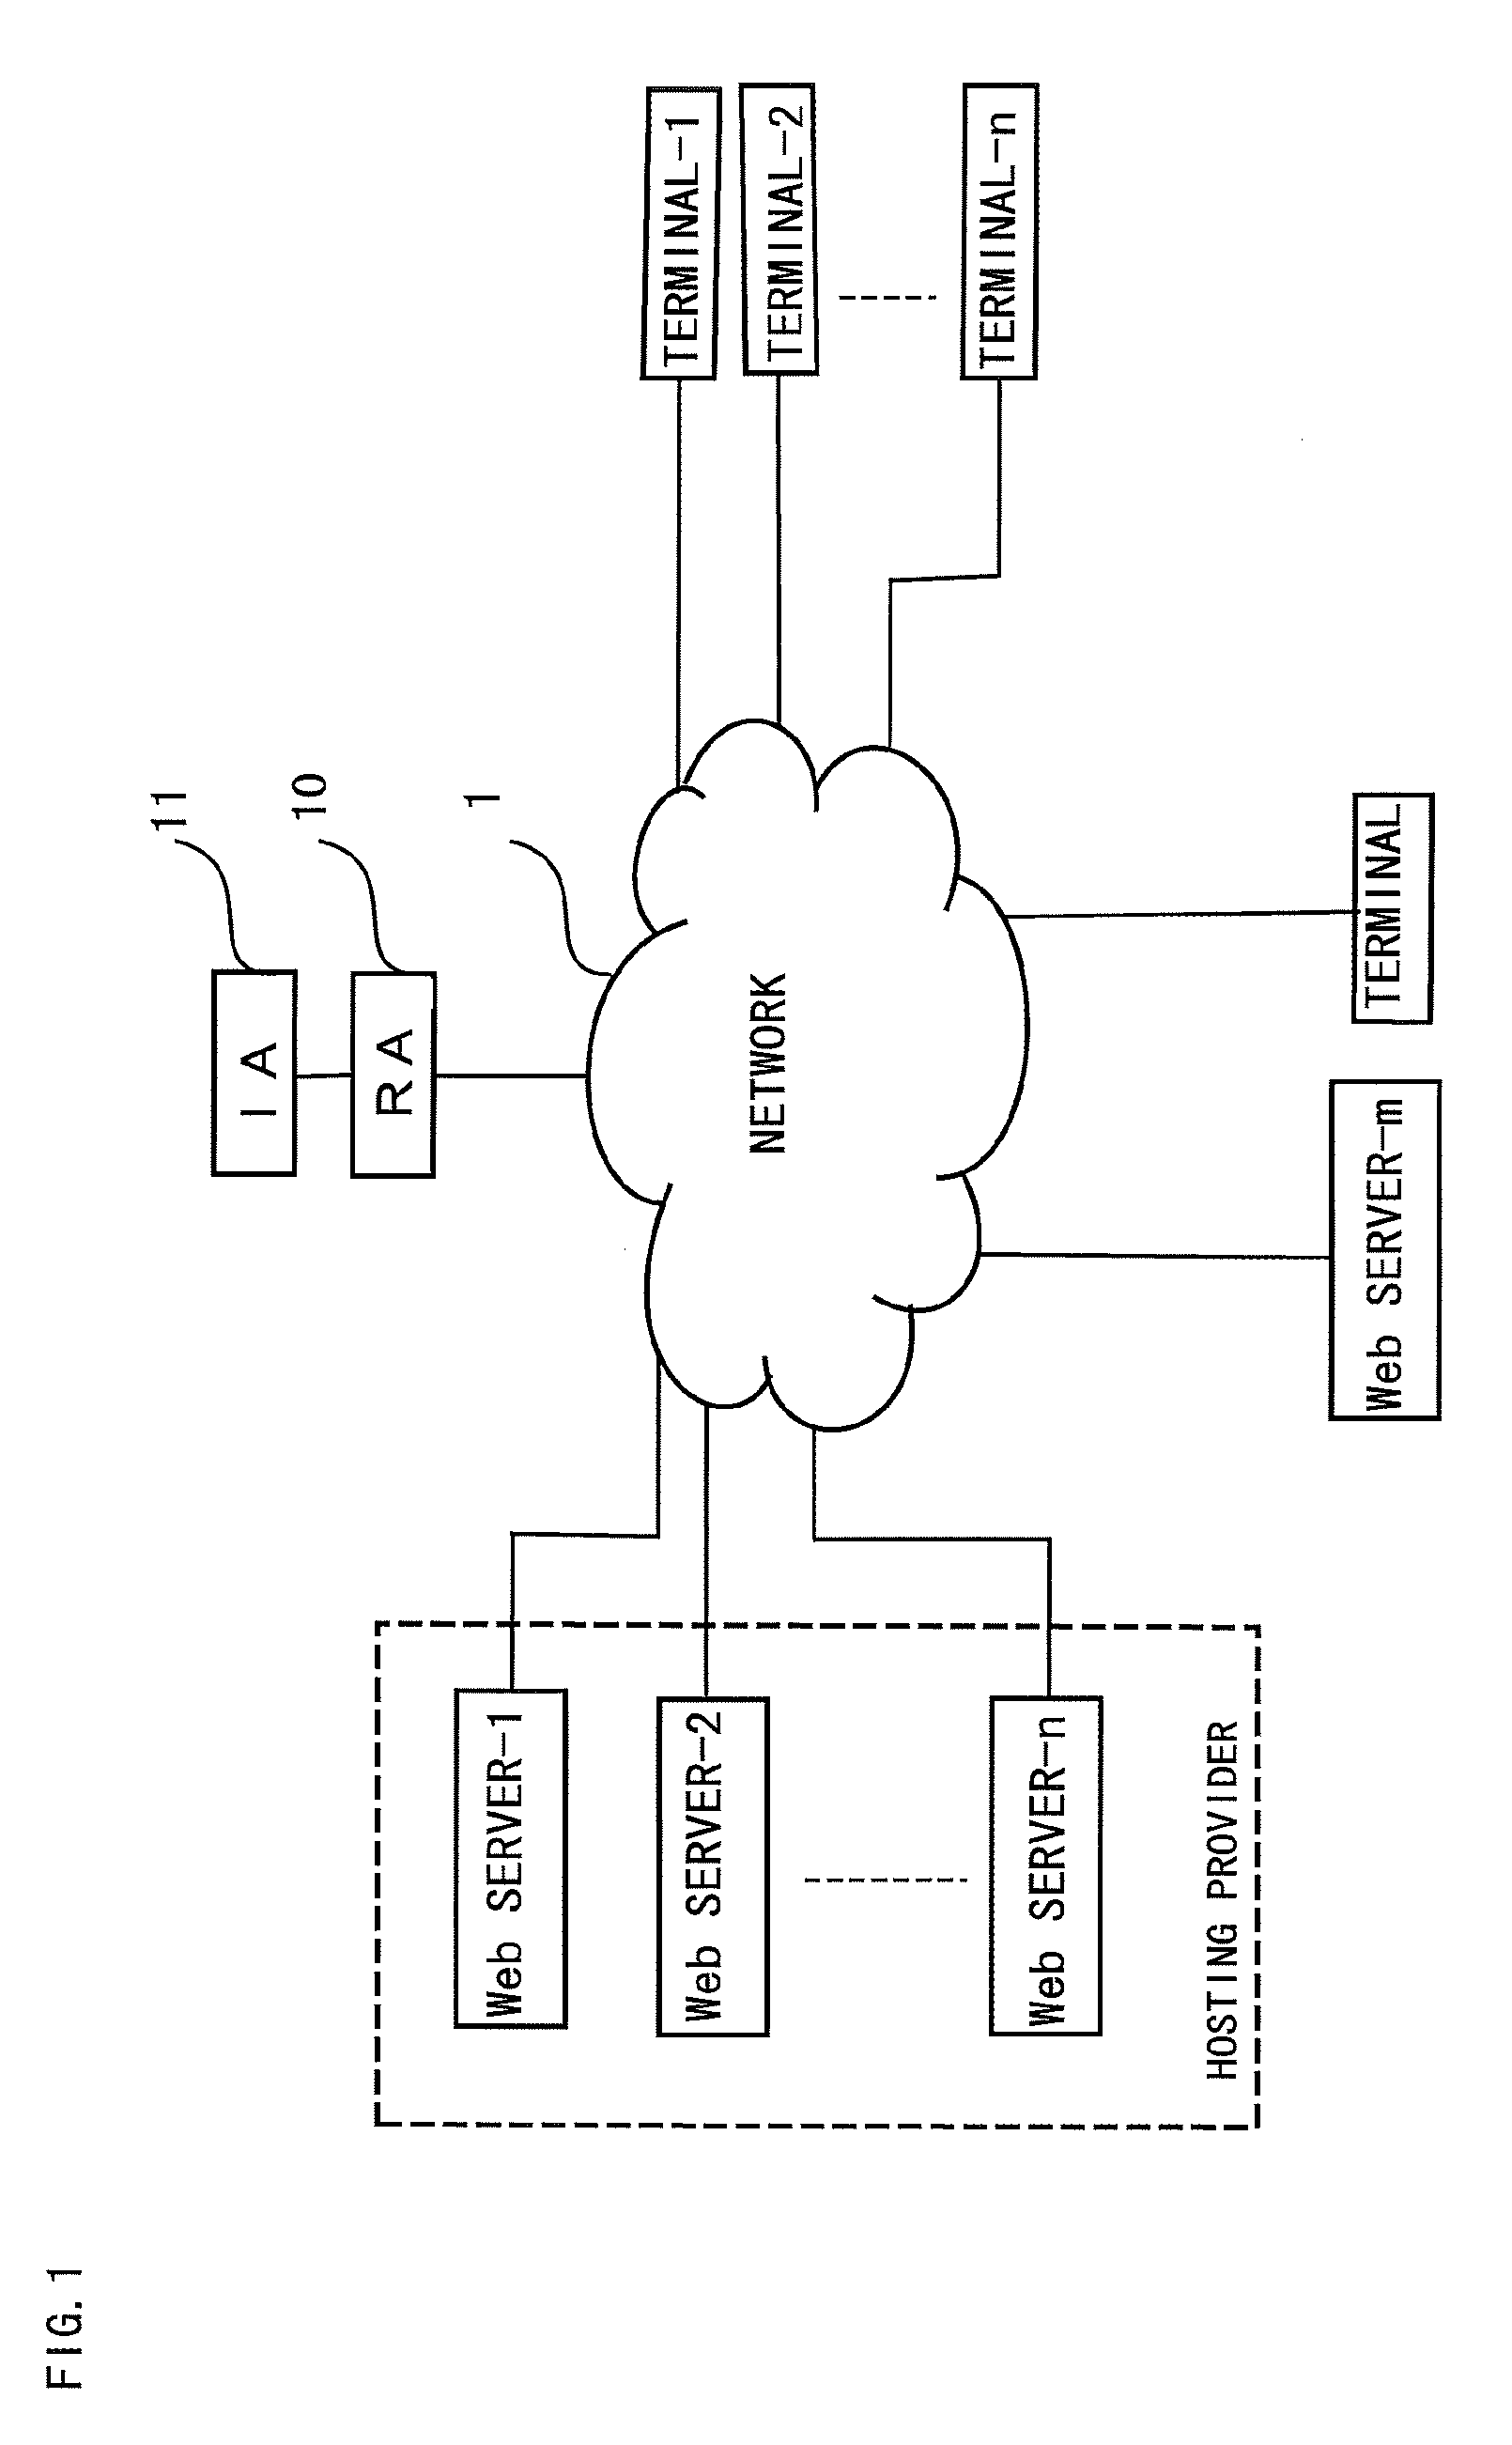 Server certificate issuing system